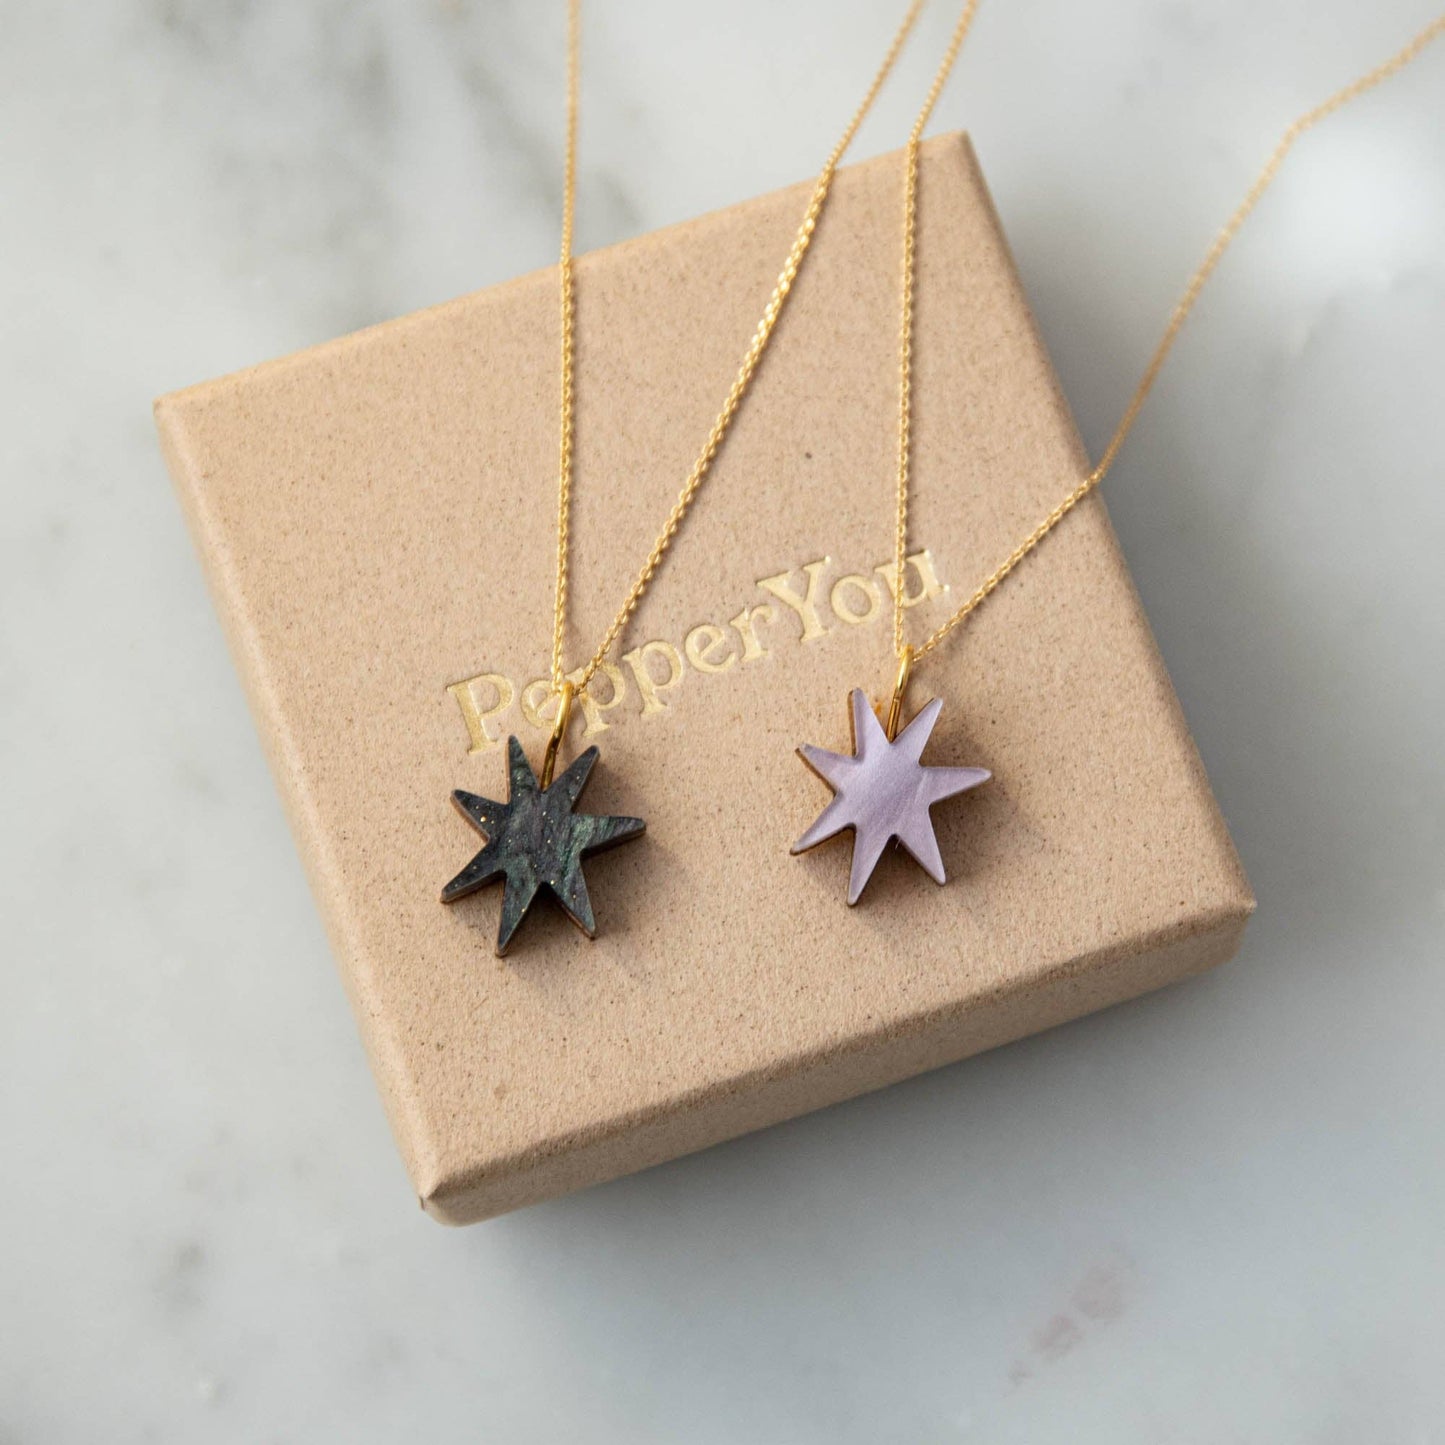 Pepper You Hand Drawn Star Gold Necklace in Smoke Black Sparkle: Lilac Marble